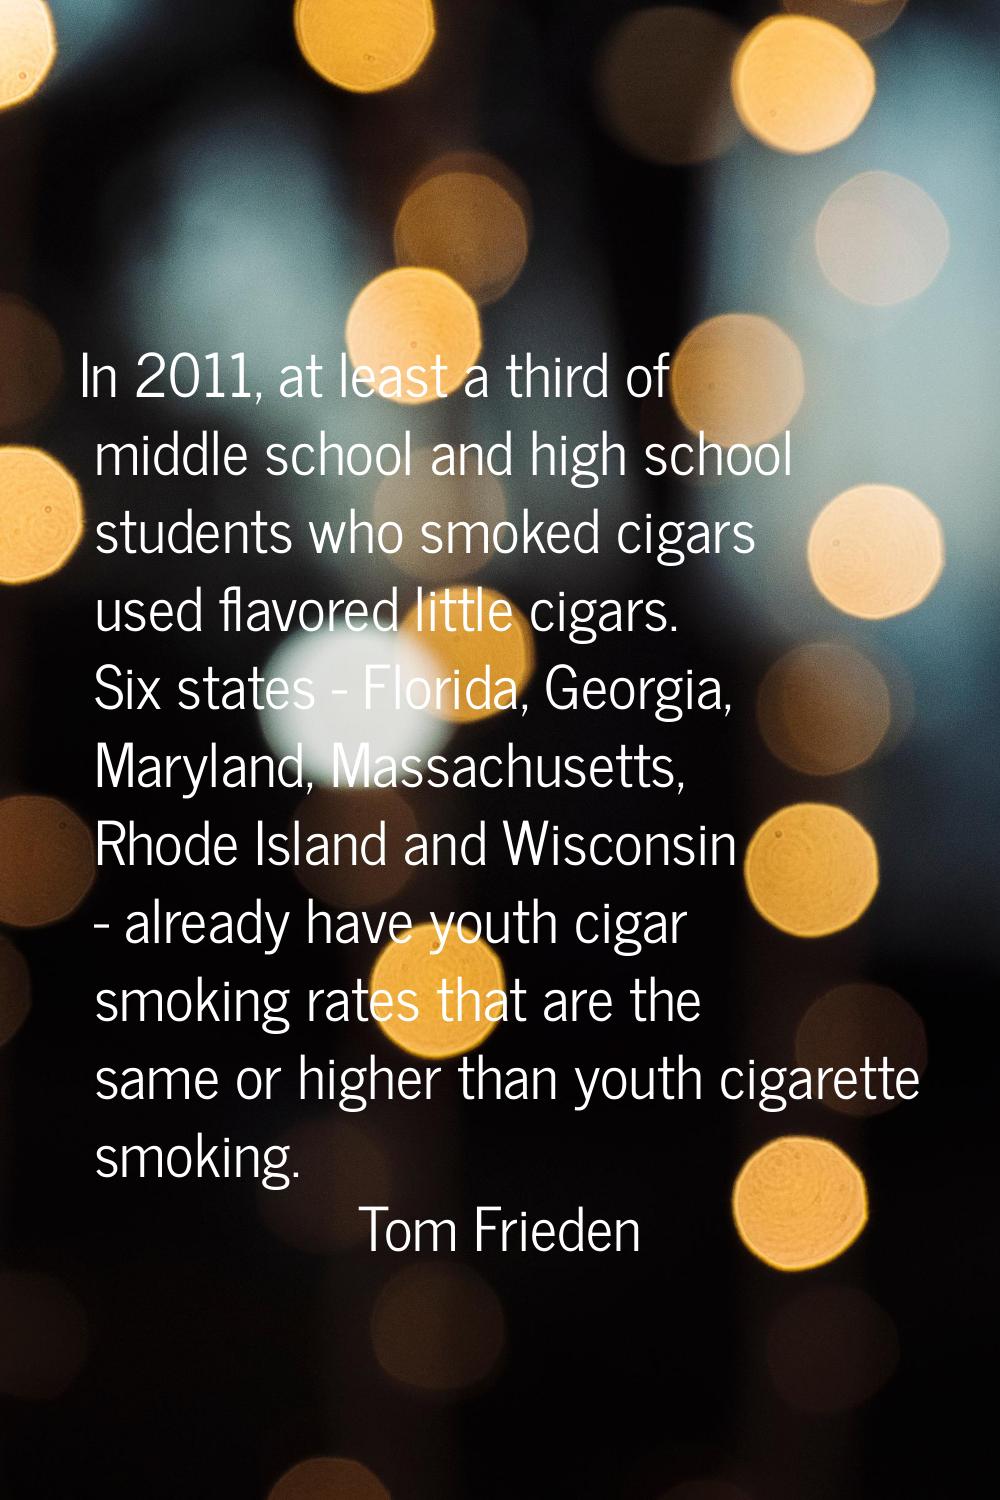 In 2011, at least a third of middle school and high school students who smoked cigars used flavored